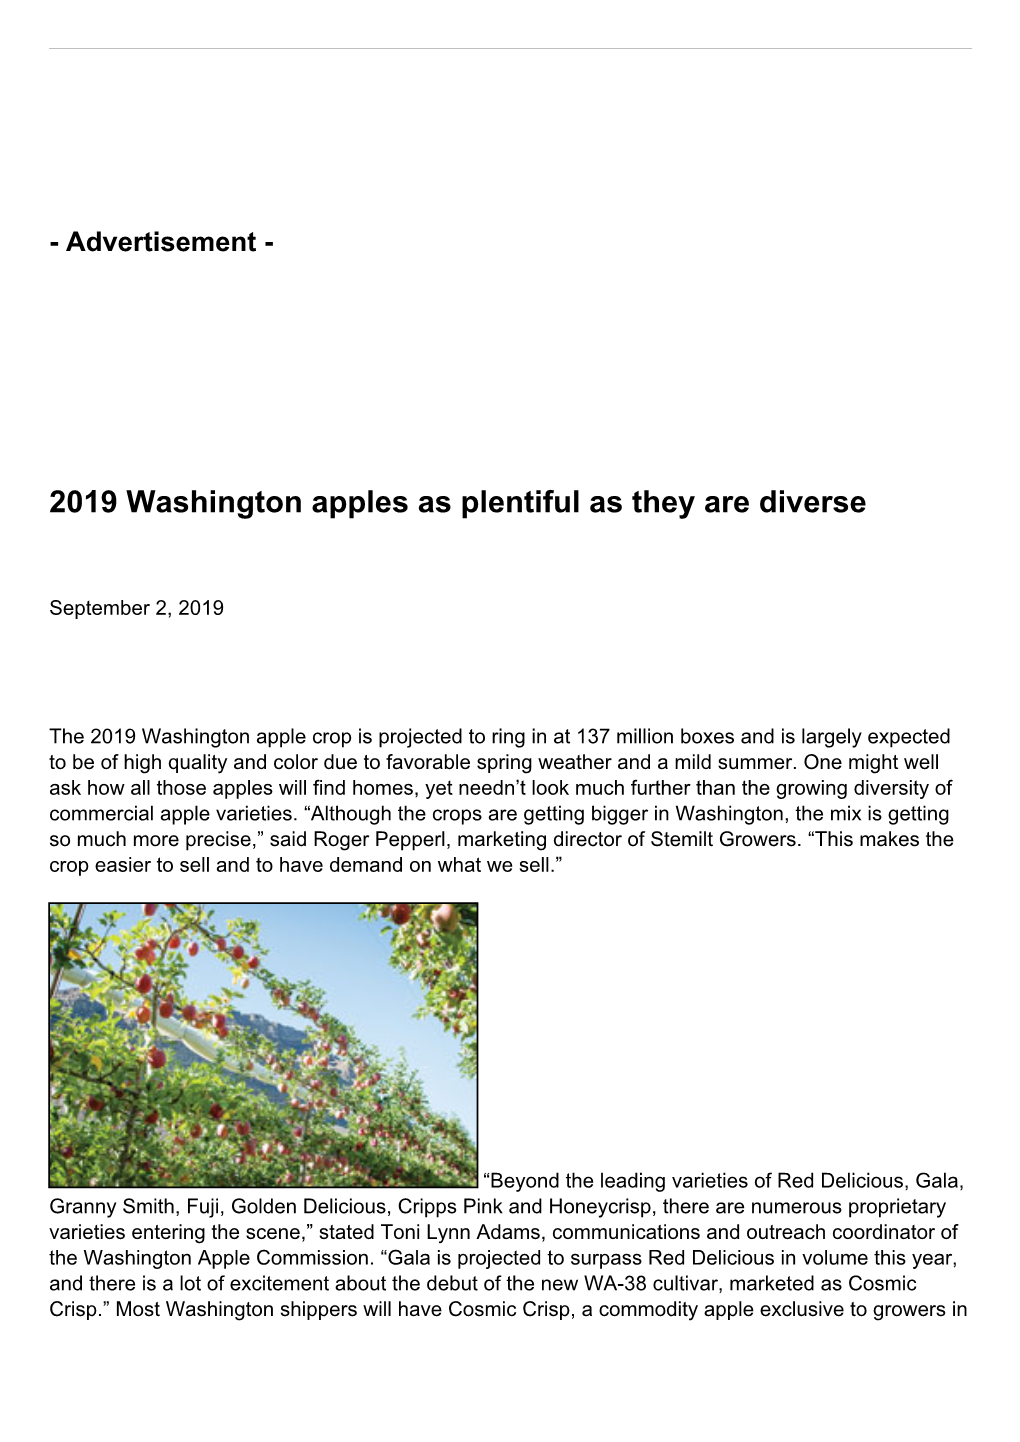 2019 Washington Apples As Plentiful As They Are Diverse